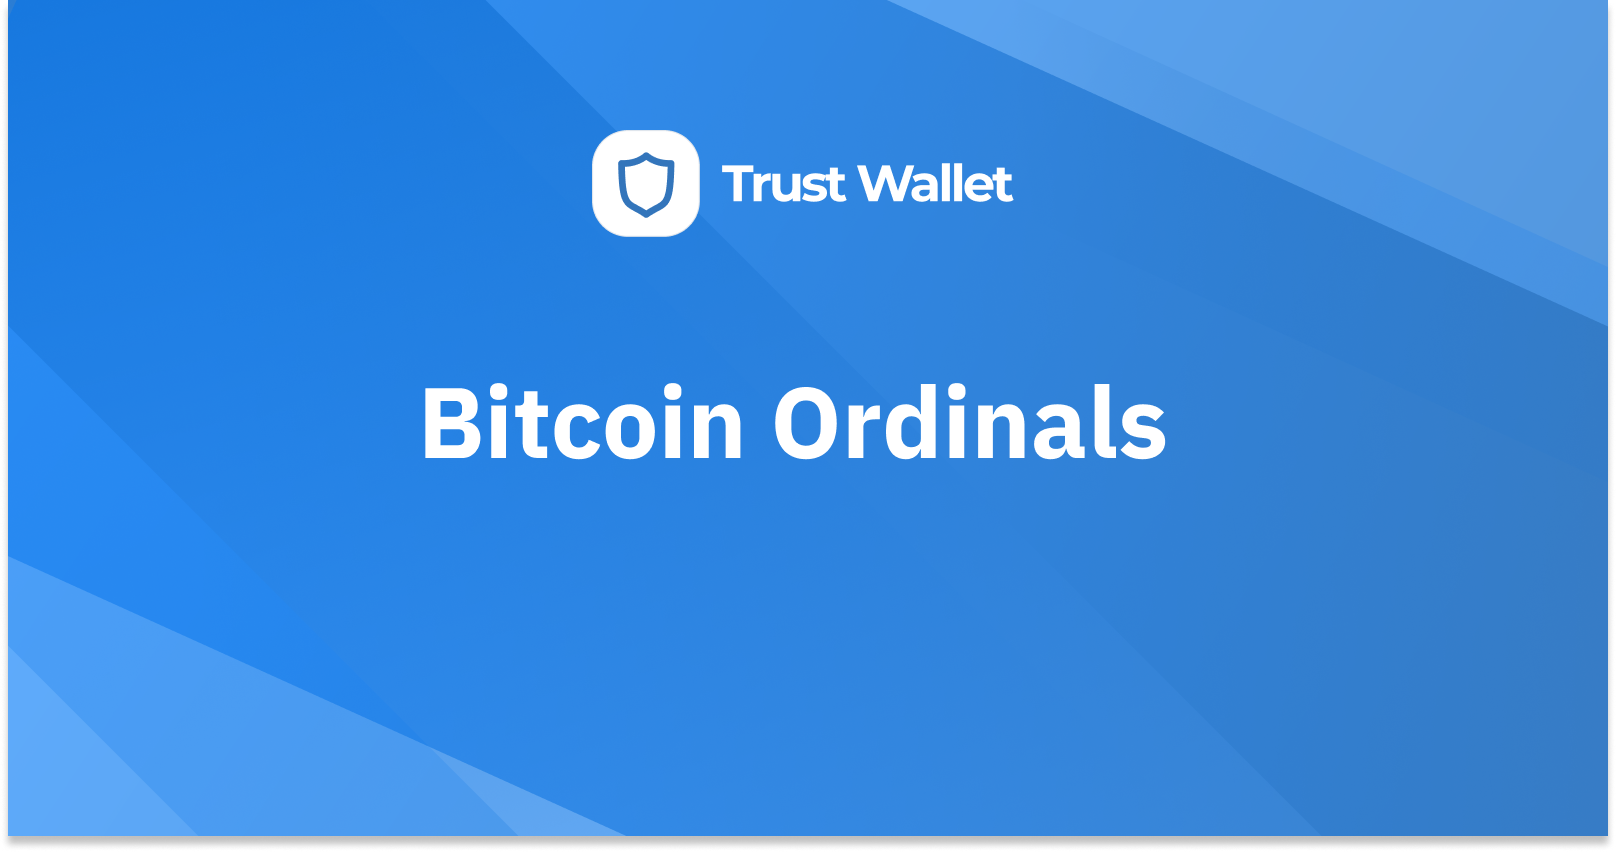 Bitcoin Ordinals: Everything You Need to Know